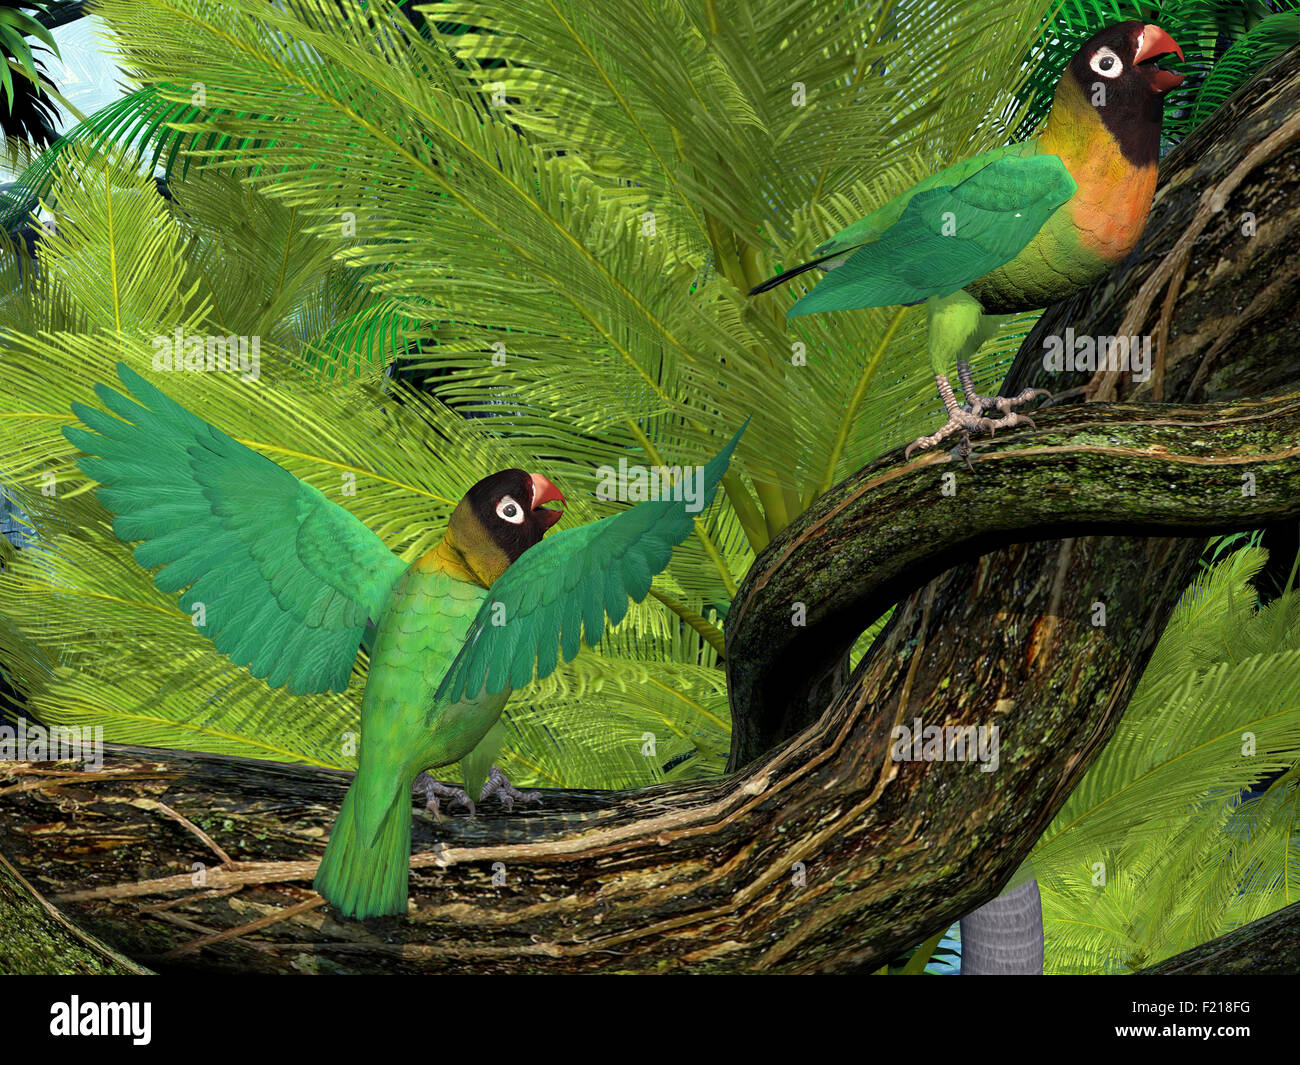 The Black-cheeked Lovebird is a small parrot with mostly green coloring and is found in Zambia, Africa. Stock Photo